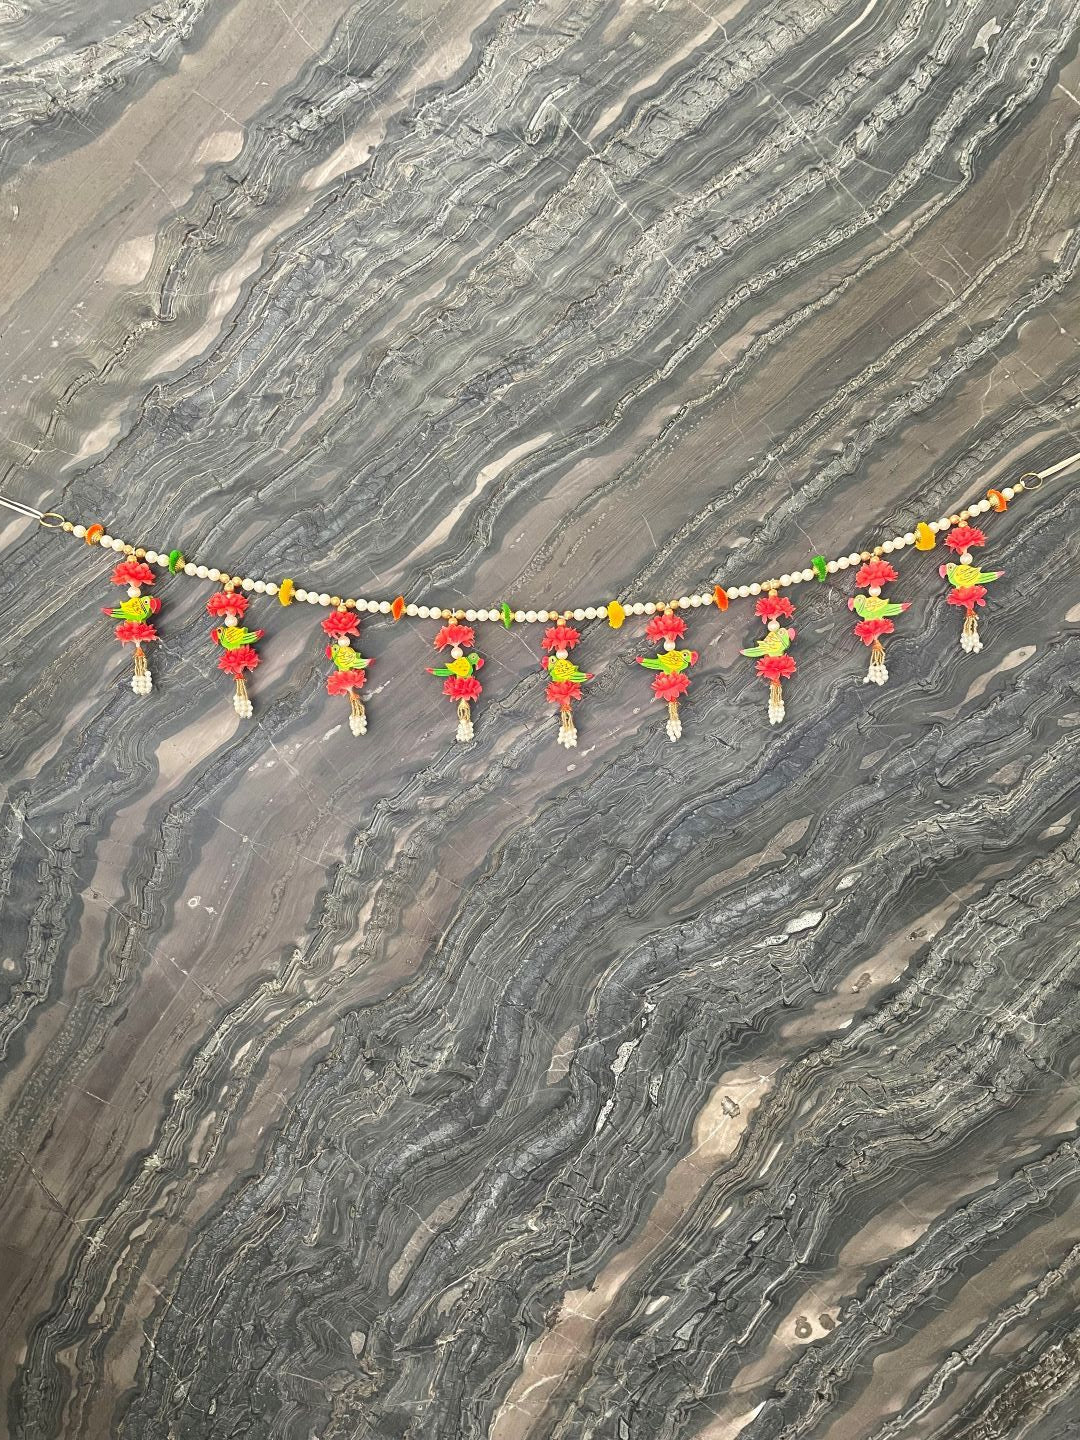 Gold & Pearl Beads With Orange flower  & Parrots Toran For Door Hangings Diwali Decoration with Hanging Crystal Balls